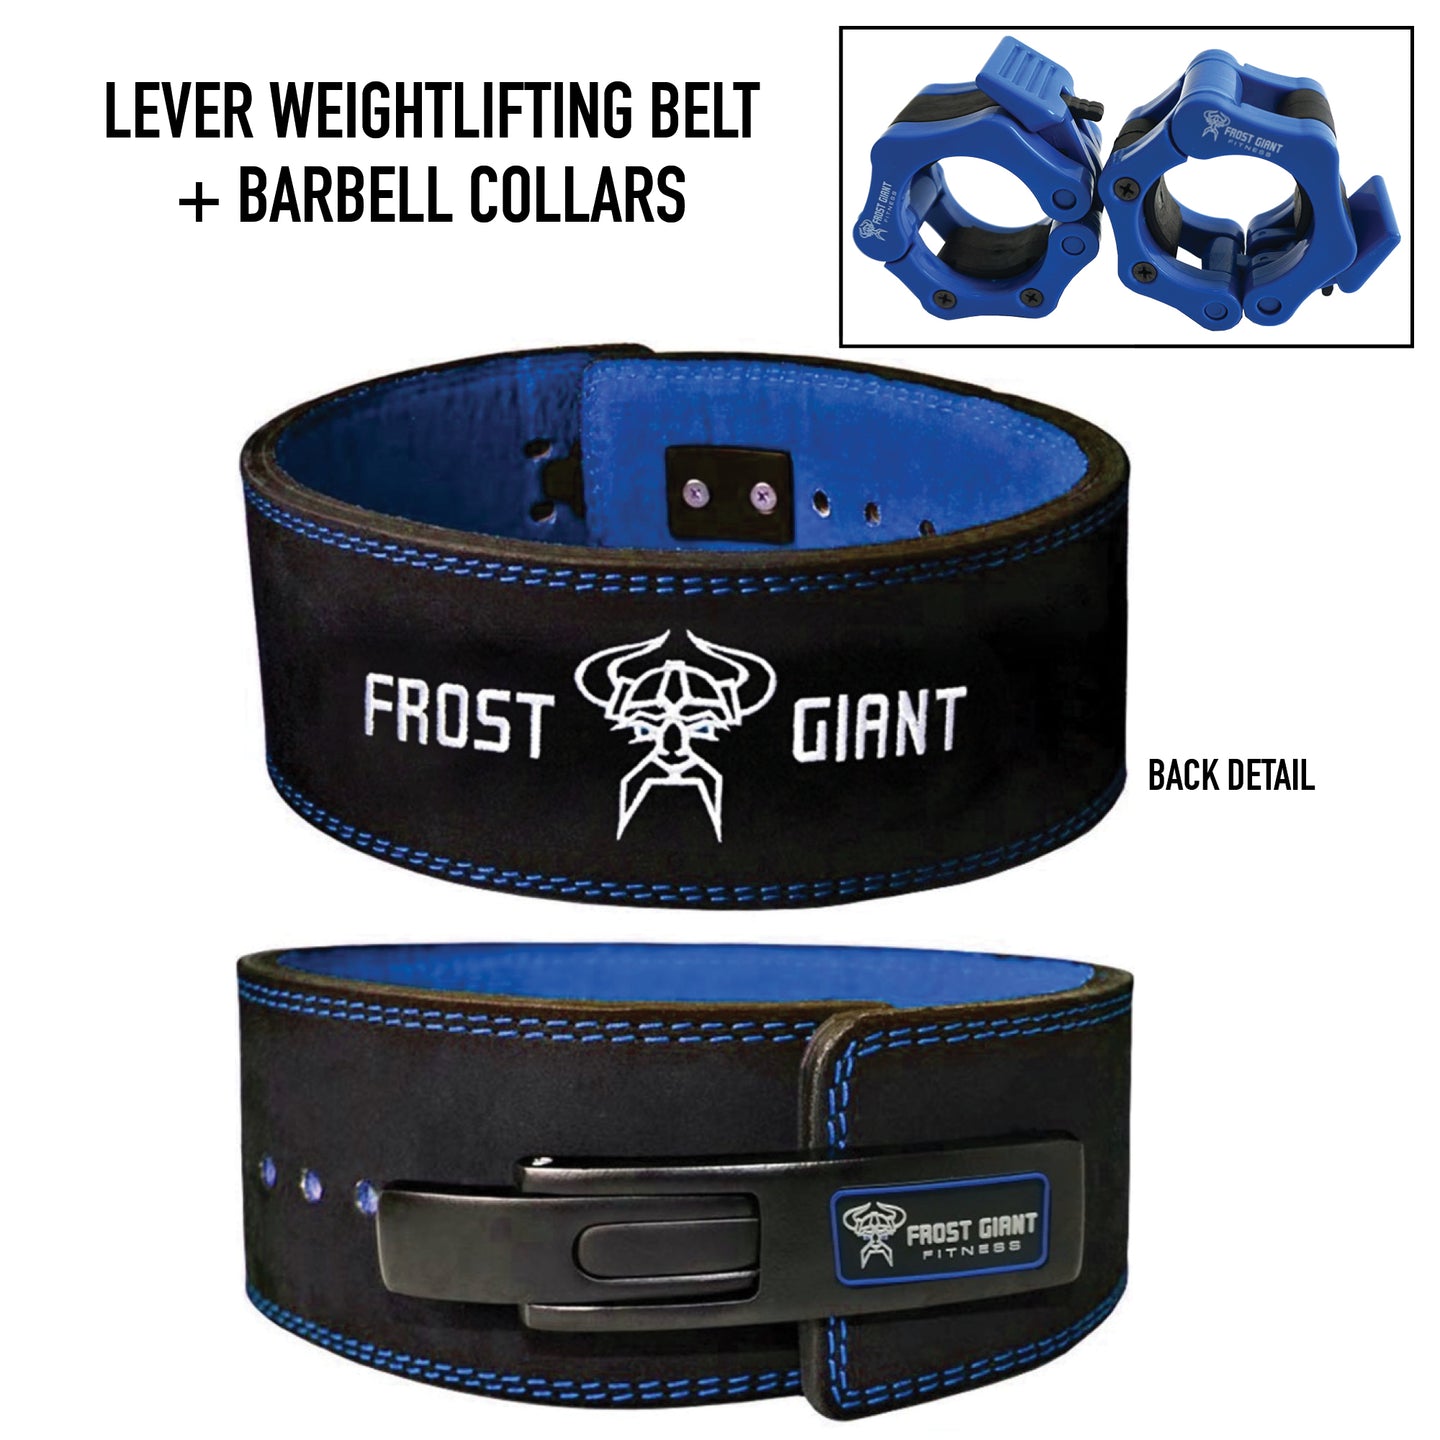 Lever Weightlifting Belt Premium Suede Leather 8 MM With Free Barbell Clamps